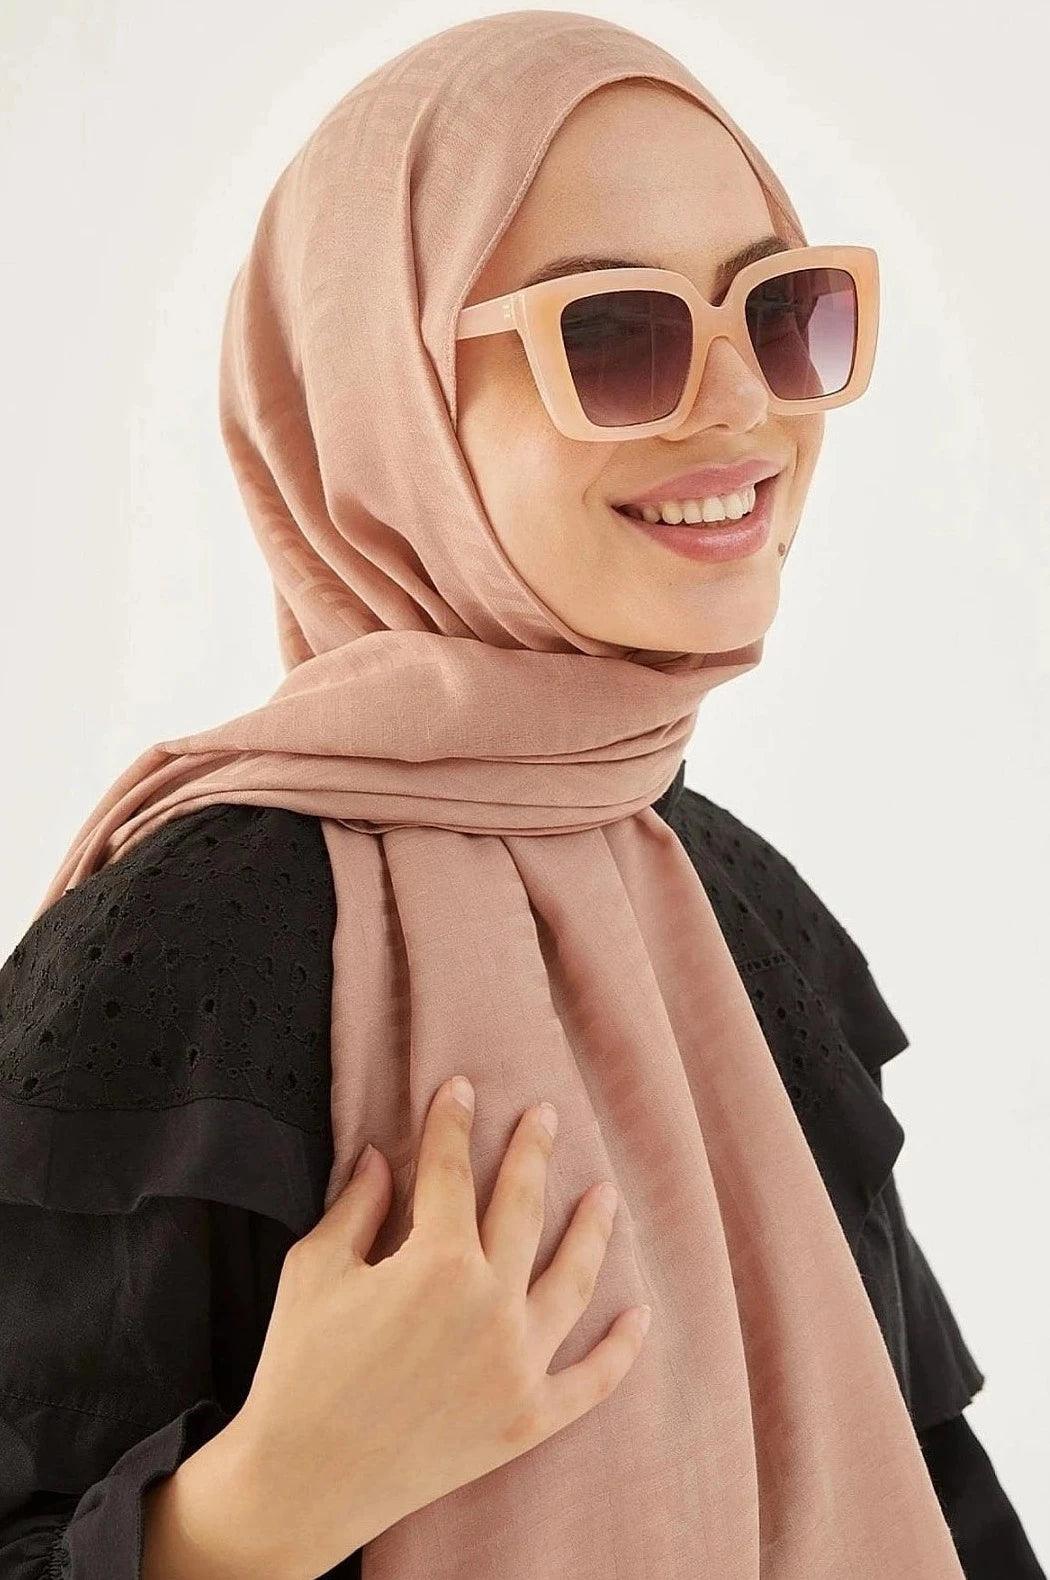 Patterned Cotton Hijab Shawl Scarf for Muslims - Rosy Brown